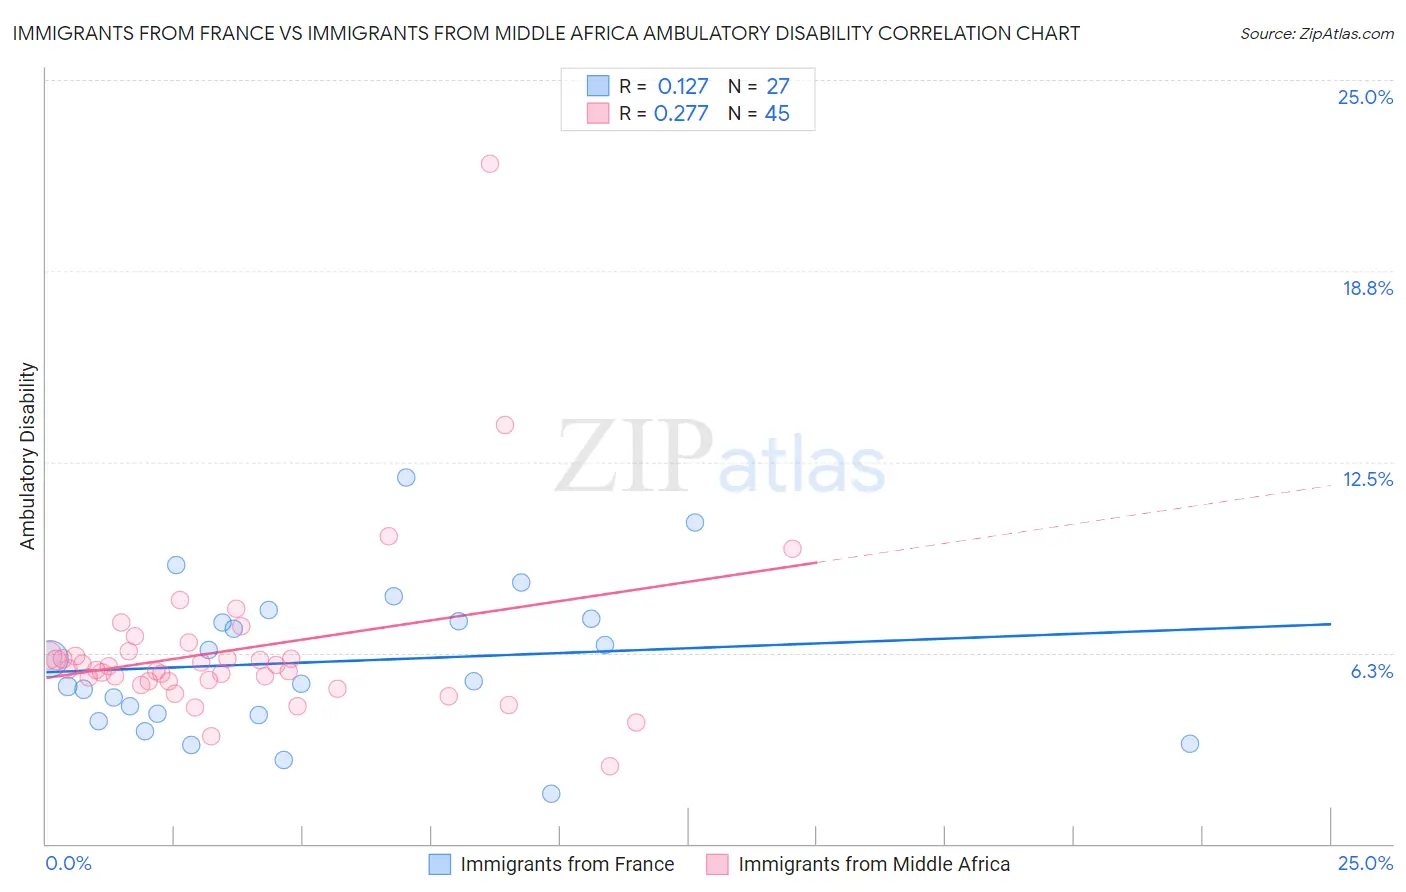 Immigrants from France vs Immigrants from Middle Africa Ambulatory Disability